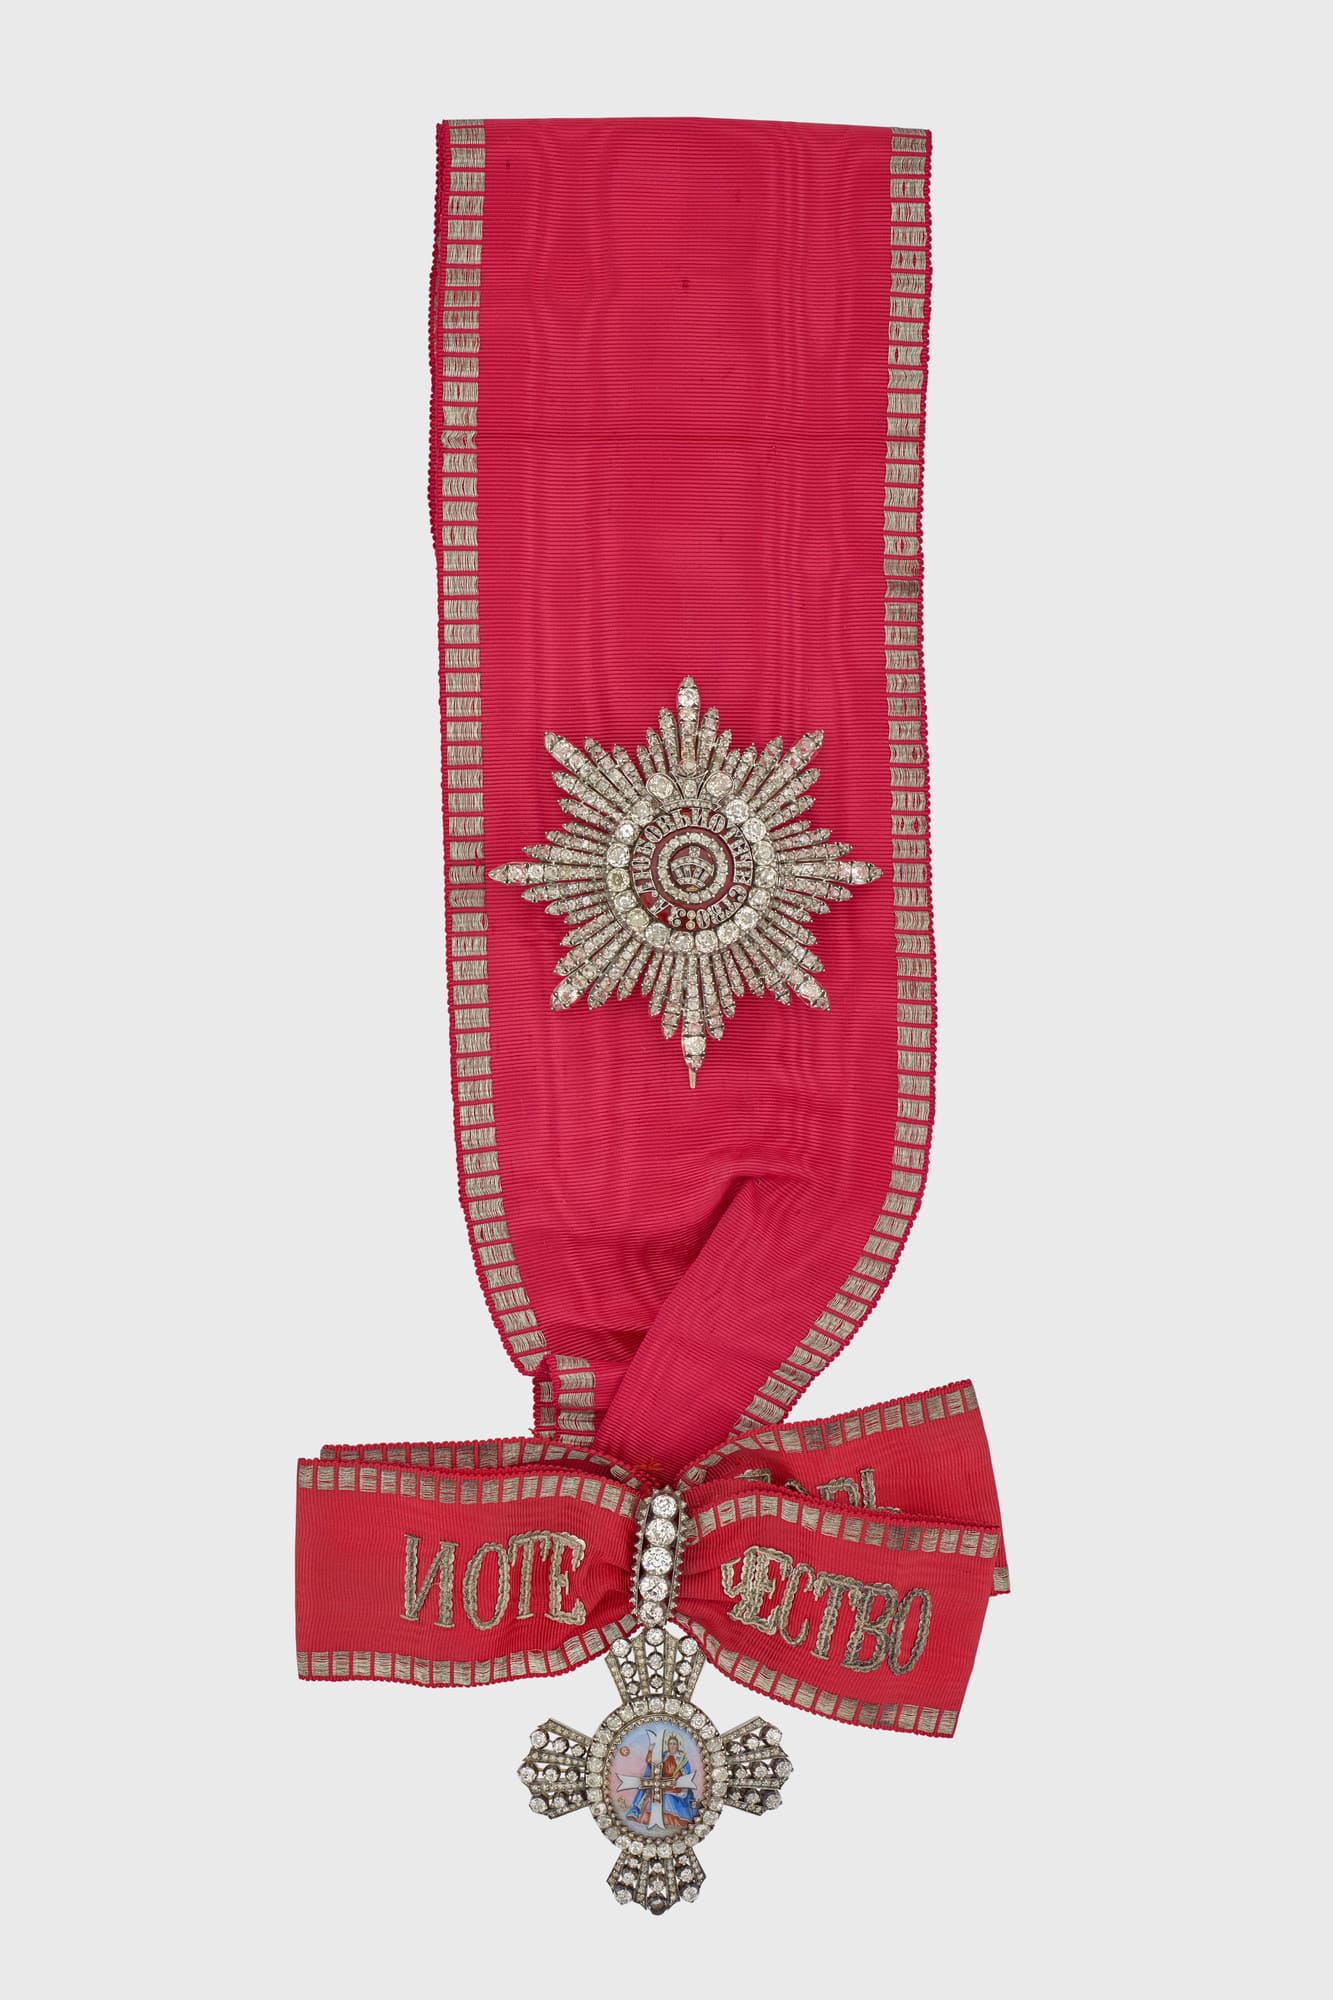 Grand Cross of the Order of Saint Catherine  awarded in  1856 to Queen Alexandra.jpg